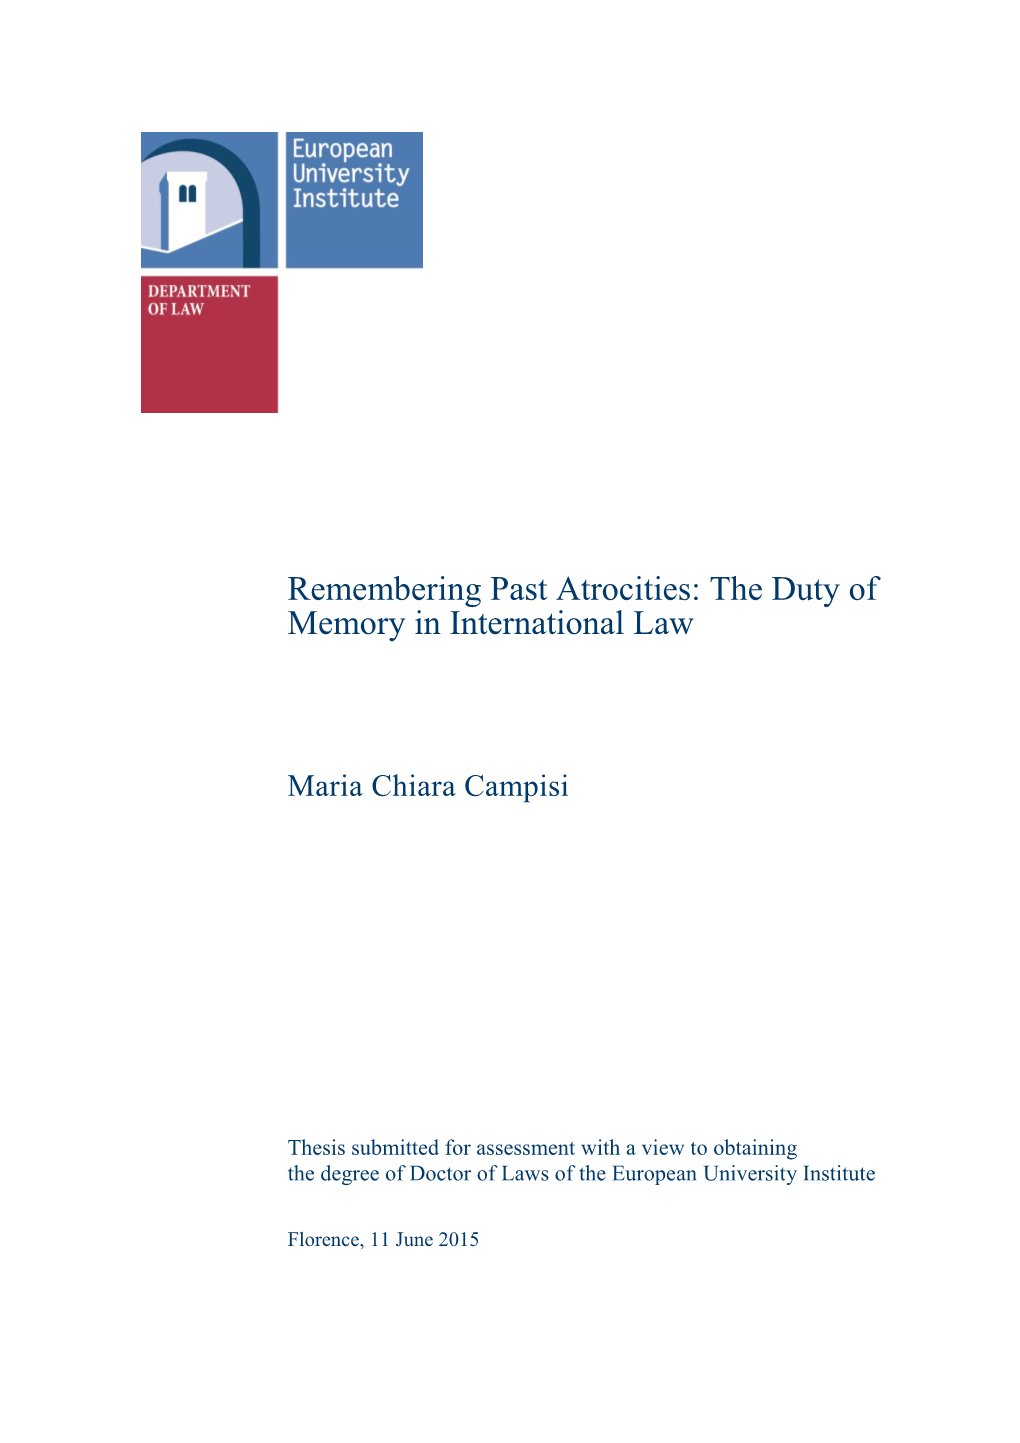 Remembering Past Atrocities: the Duty of Memory in International Law